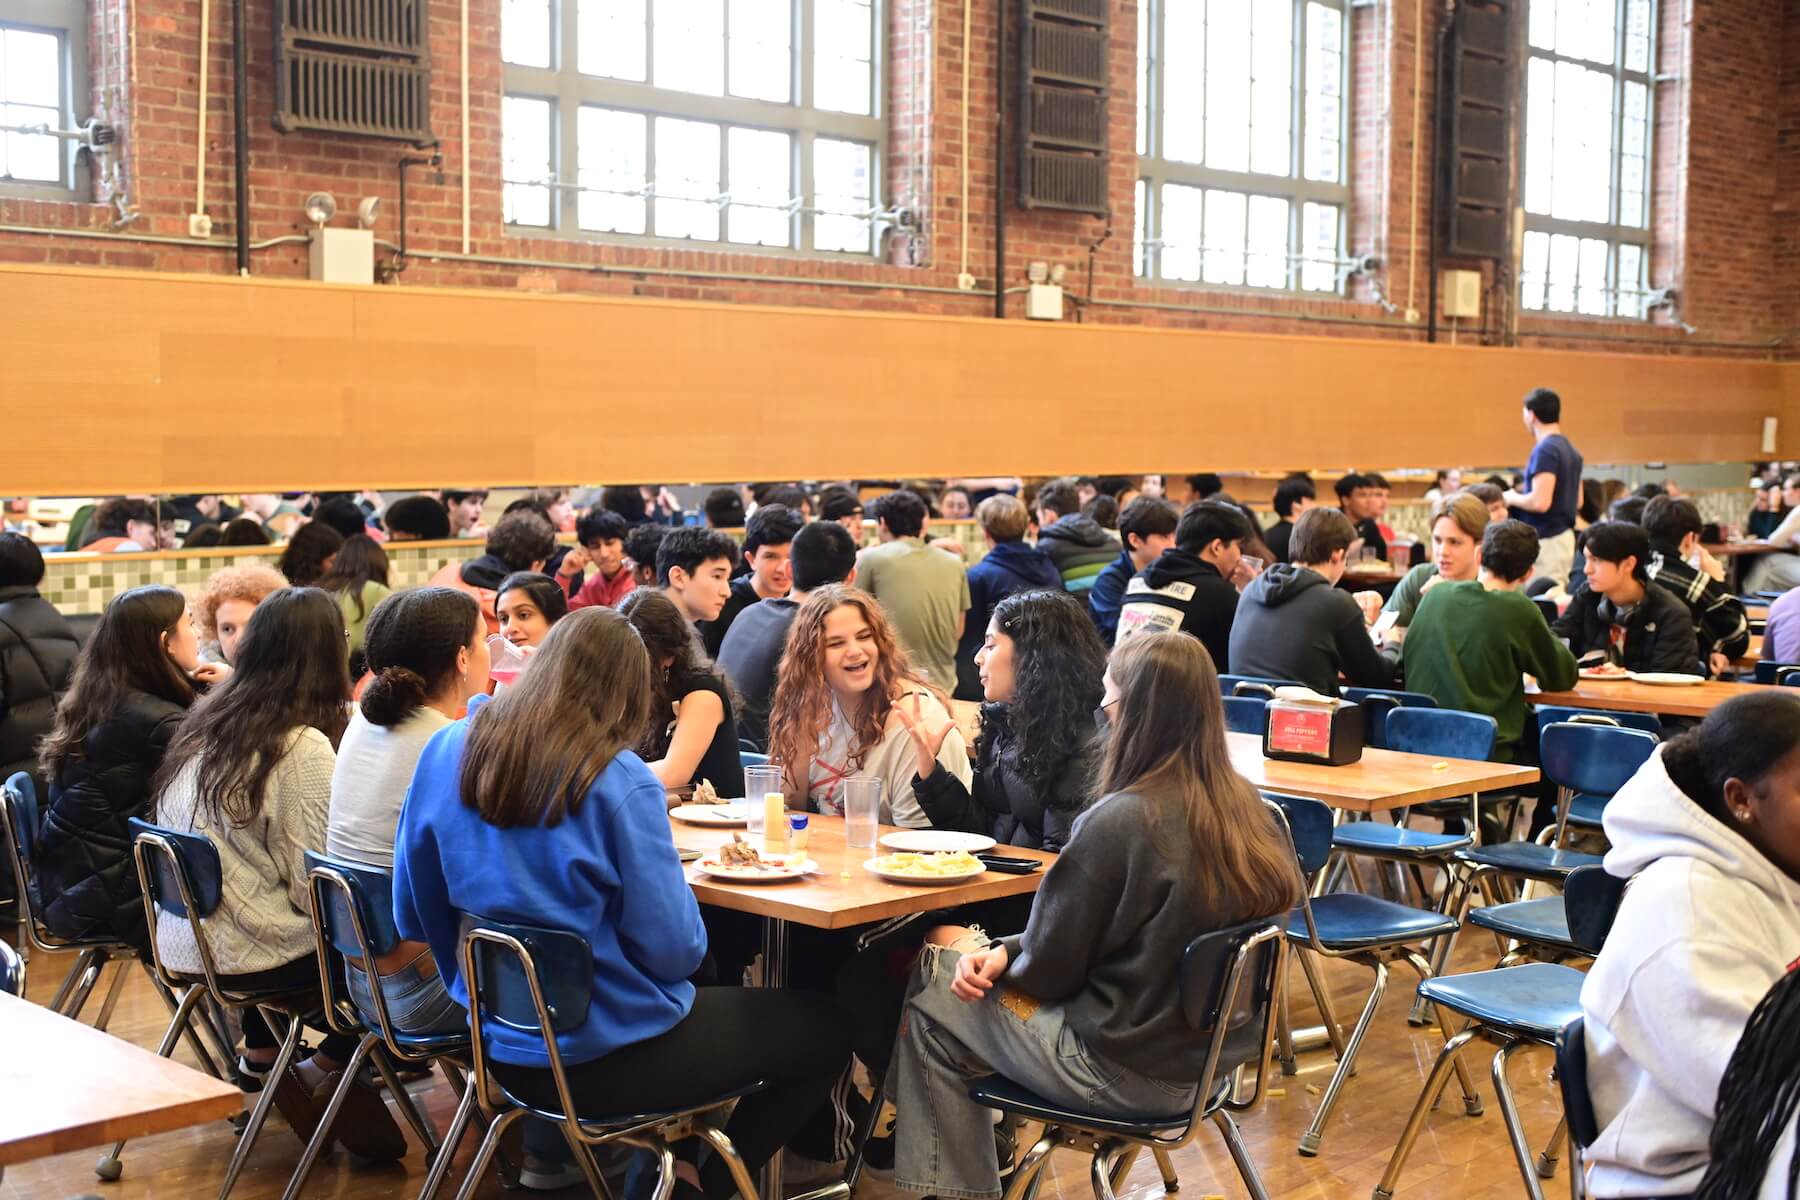 Ethical Culture Fieldston School students engaging in conversation during lunch at Fieldston Upper